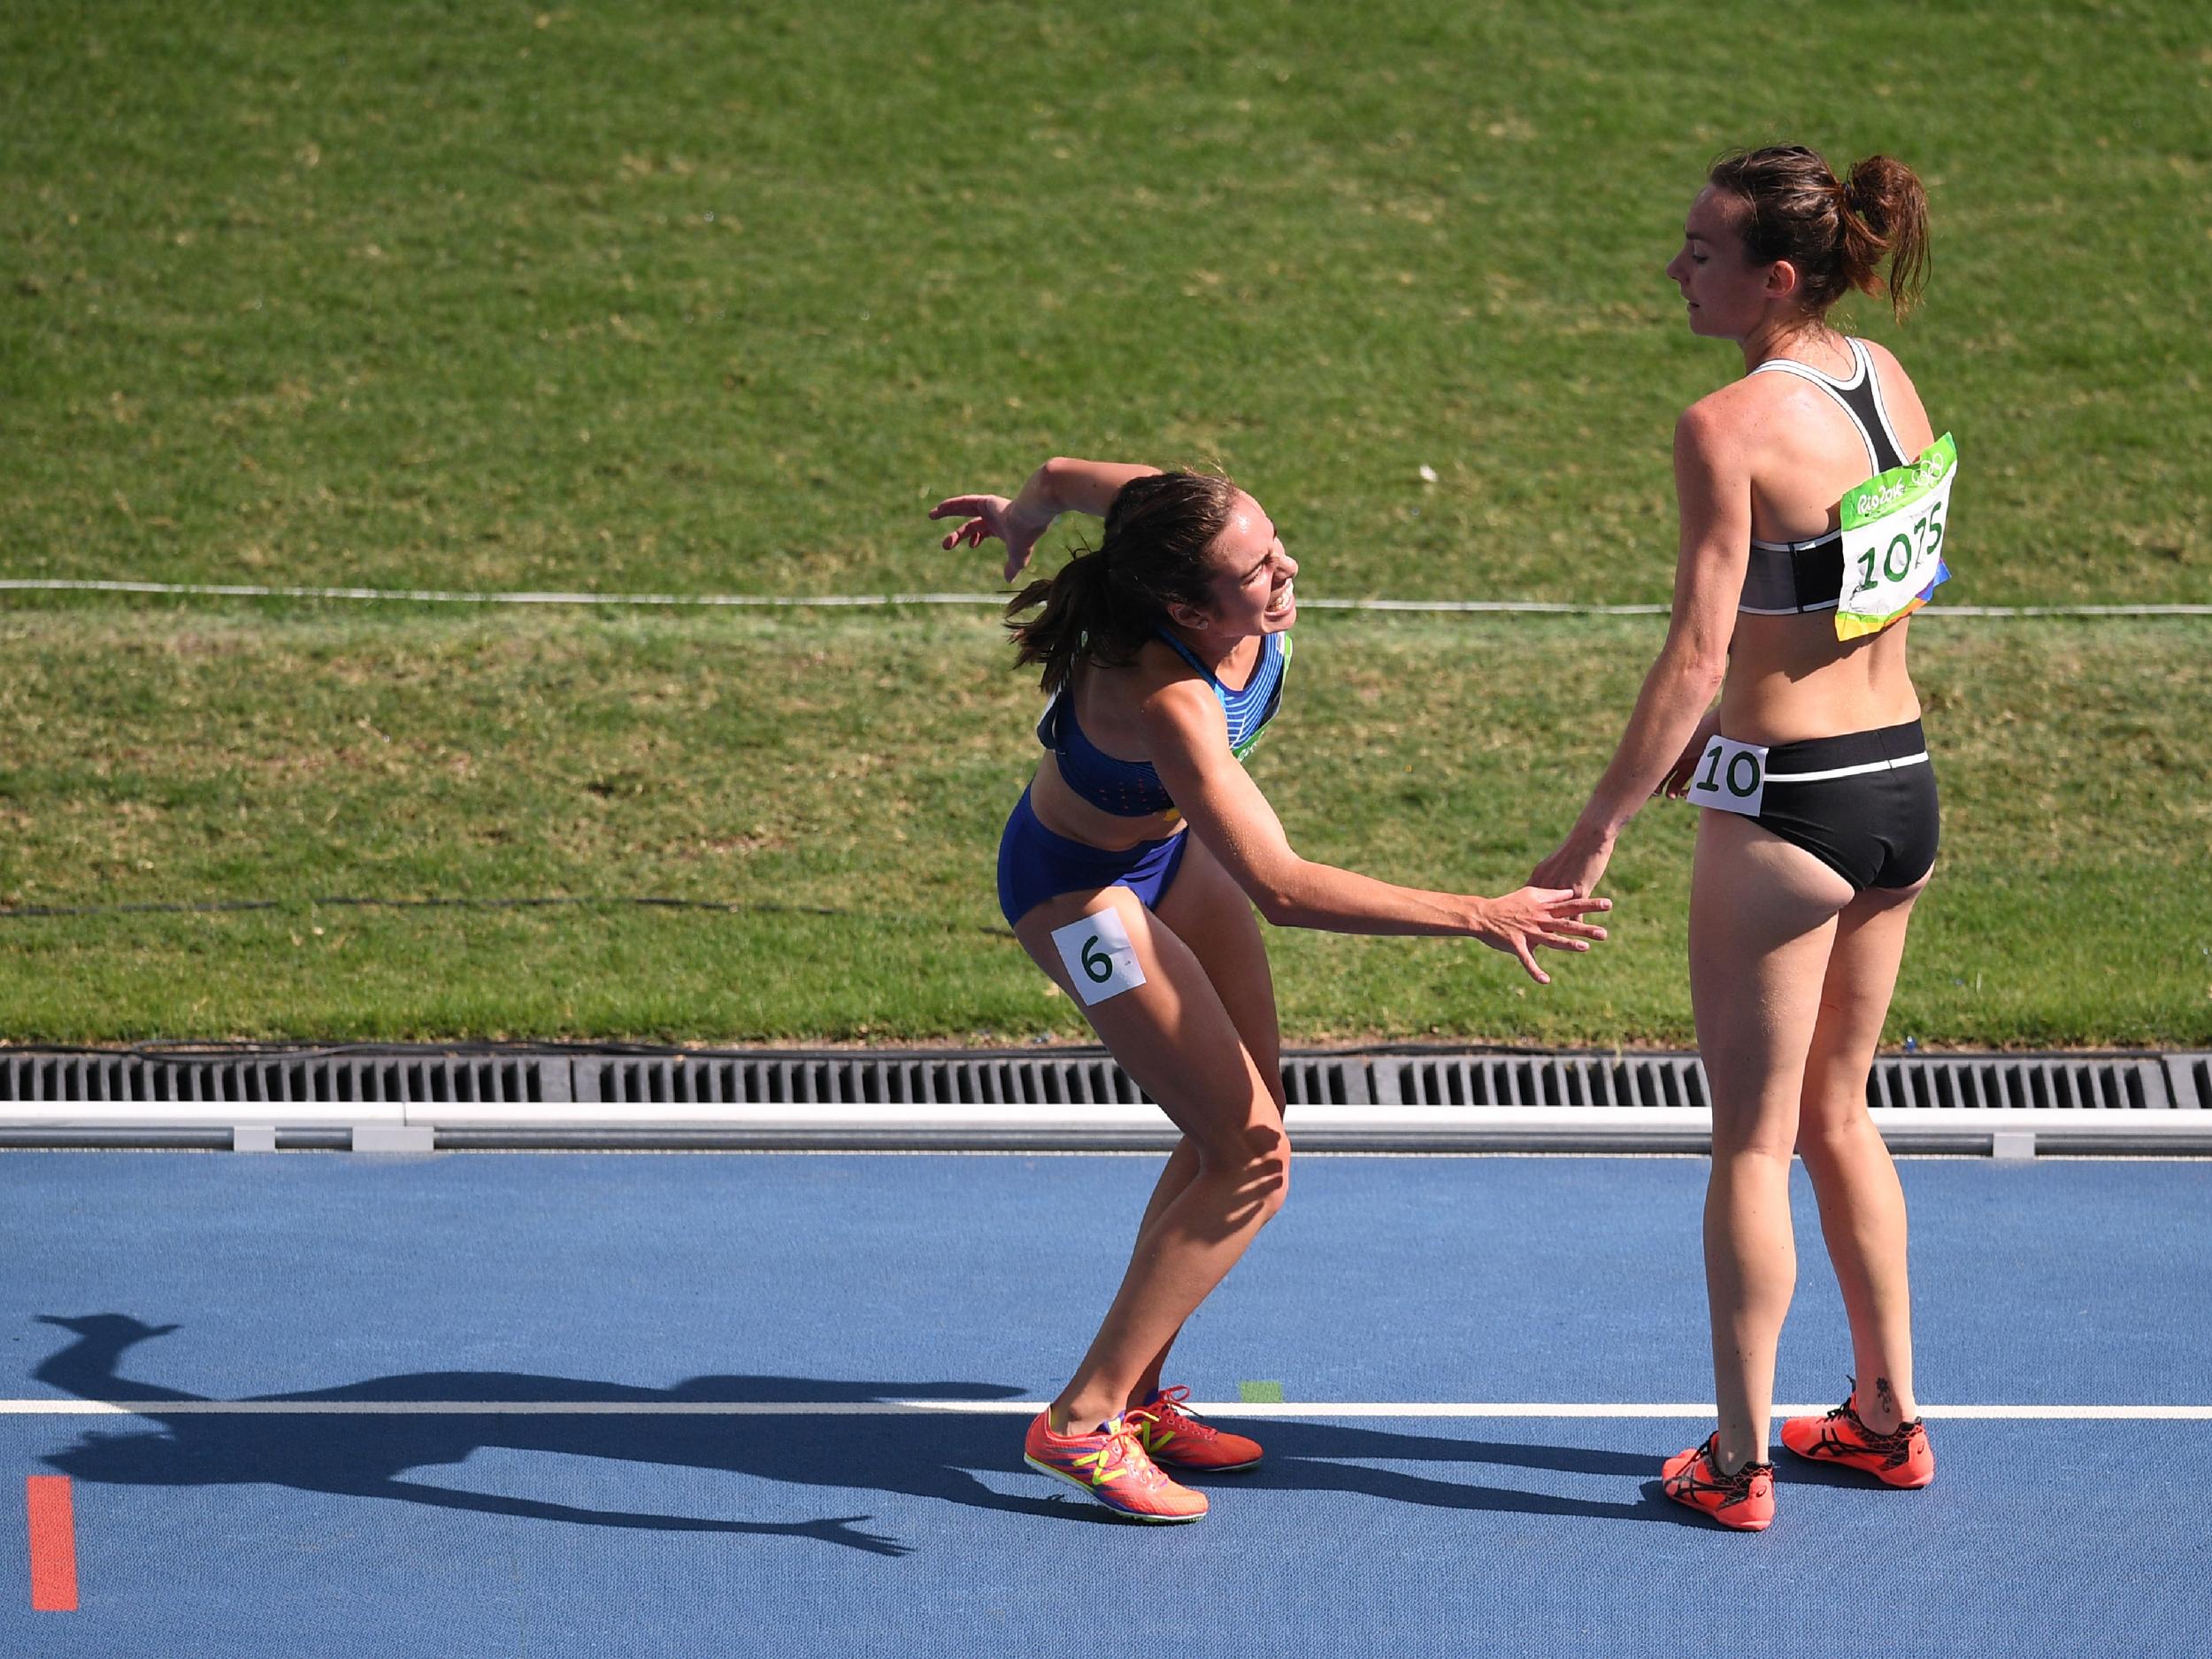 New Zealand's Nikki Hamblin (R) helps USA's Abbey D'Agostino after she was injured in the Women's 5000m Round 1